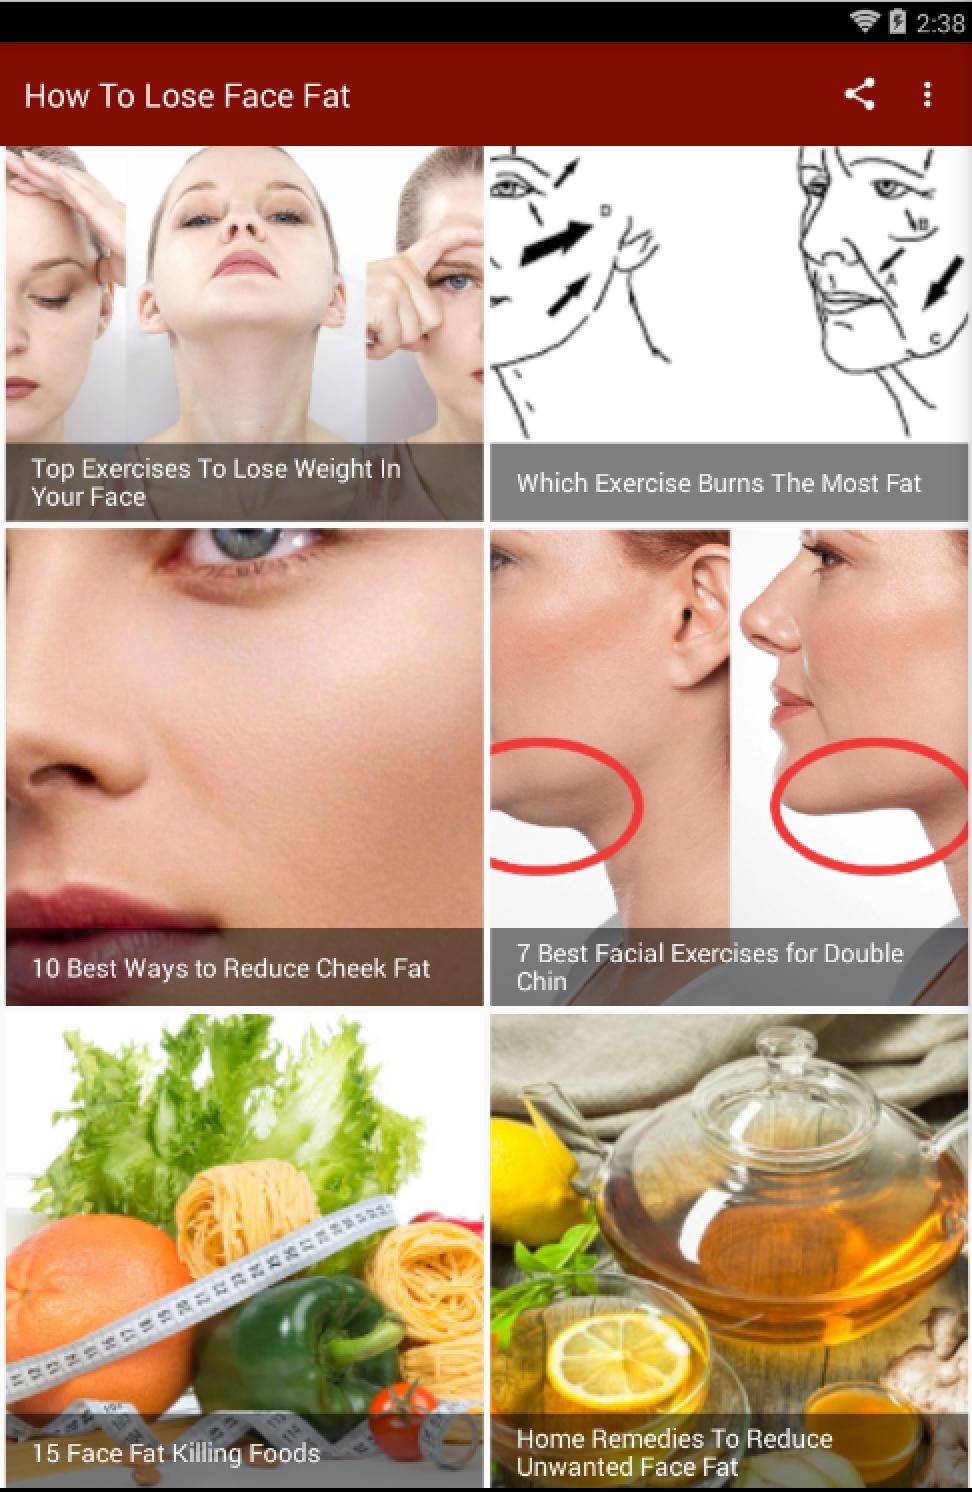 How To Lose Face Fat For Android Apk Download